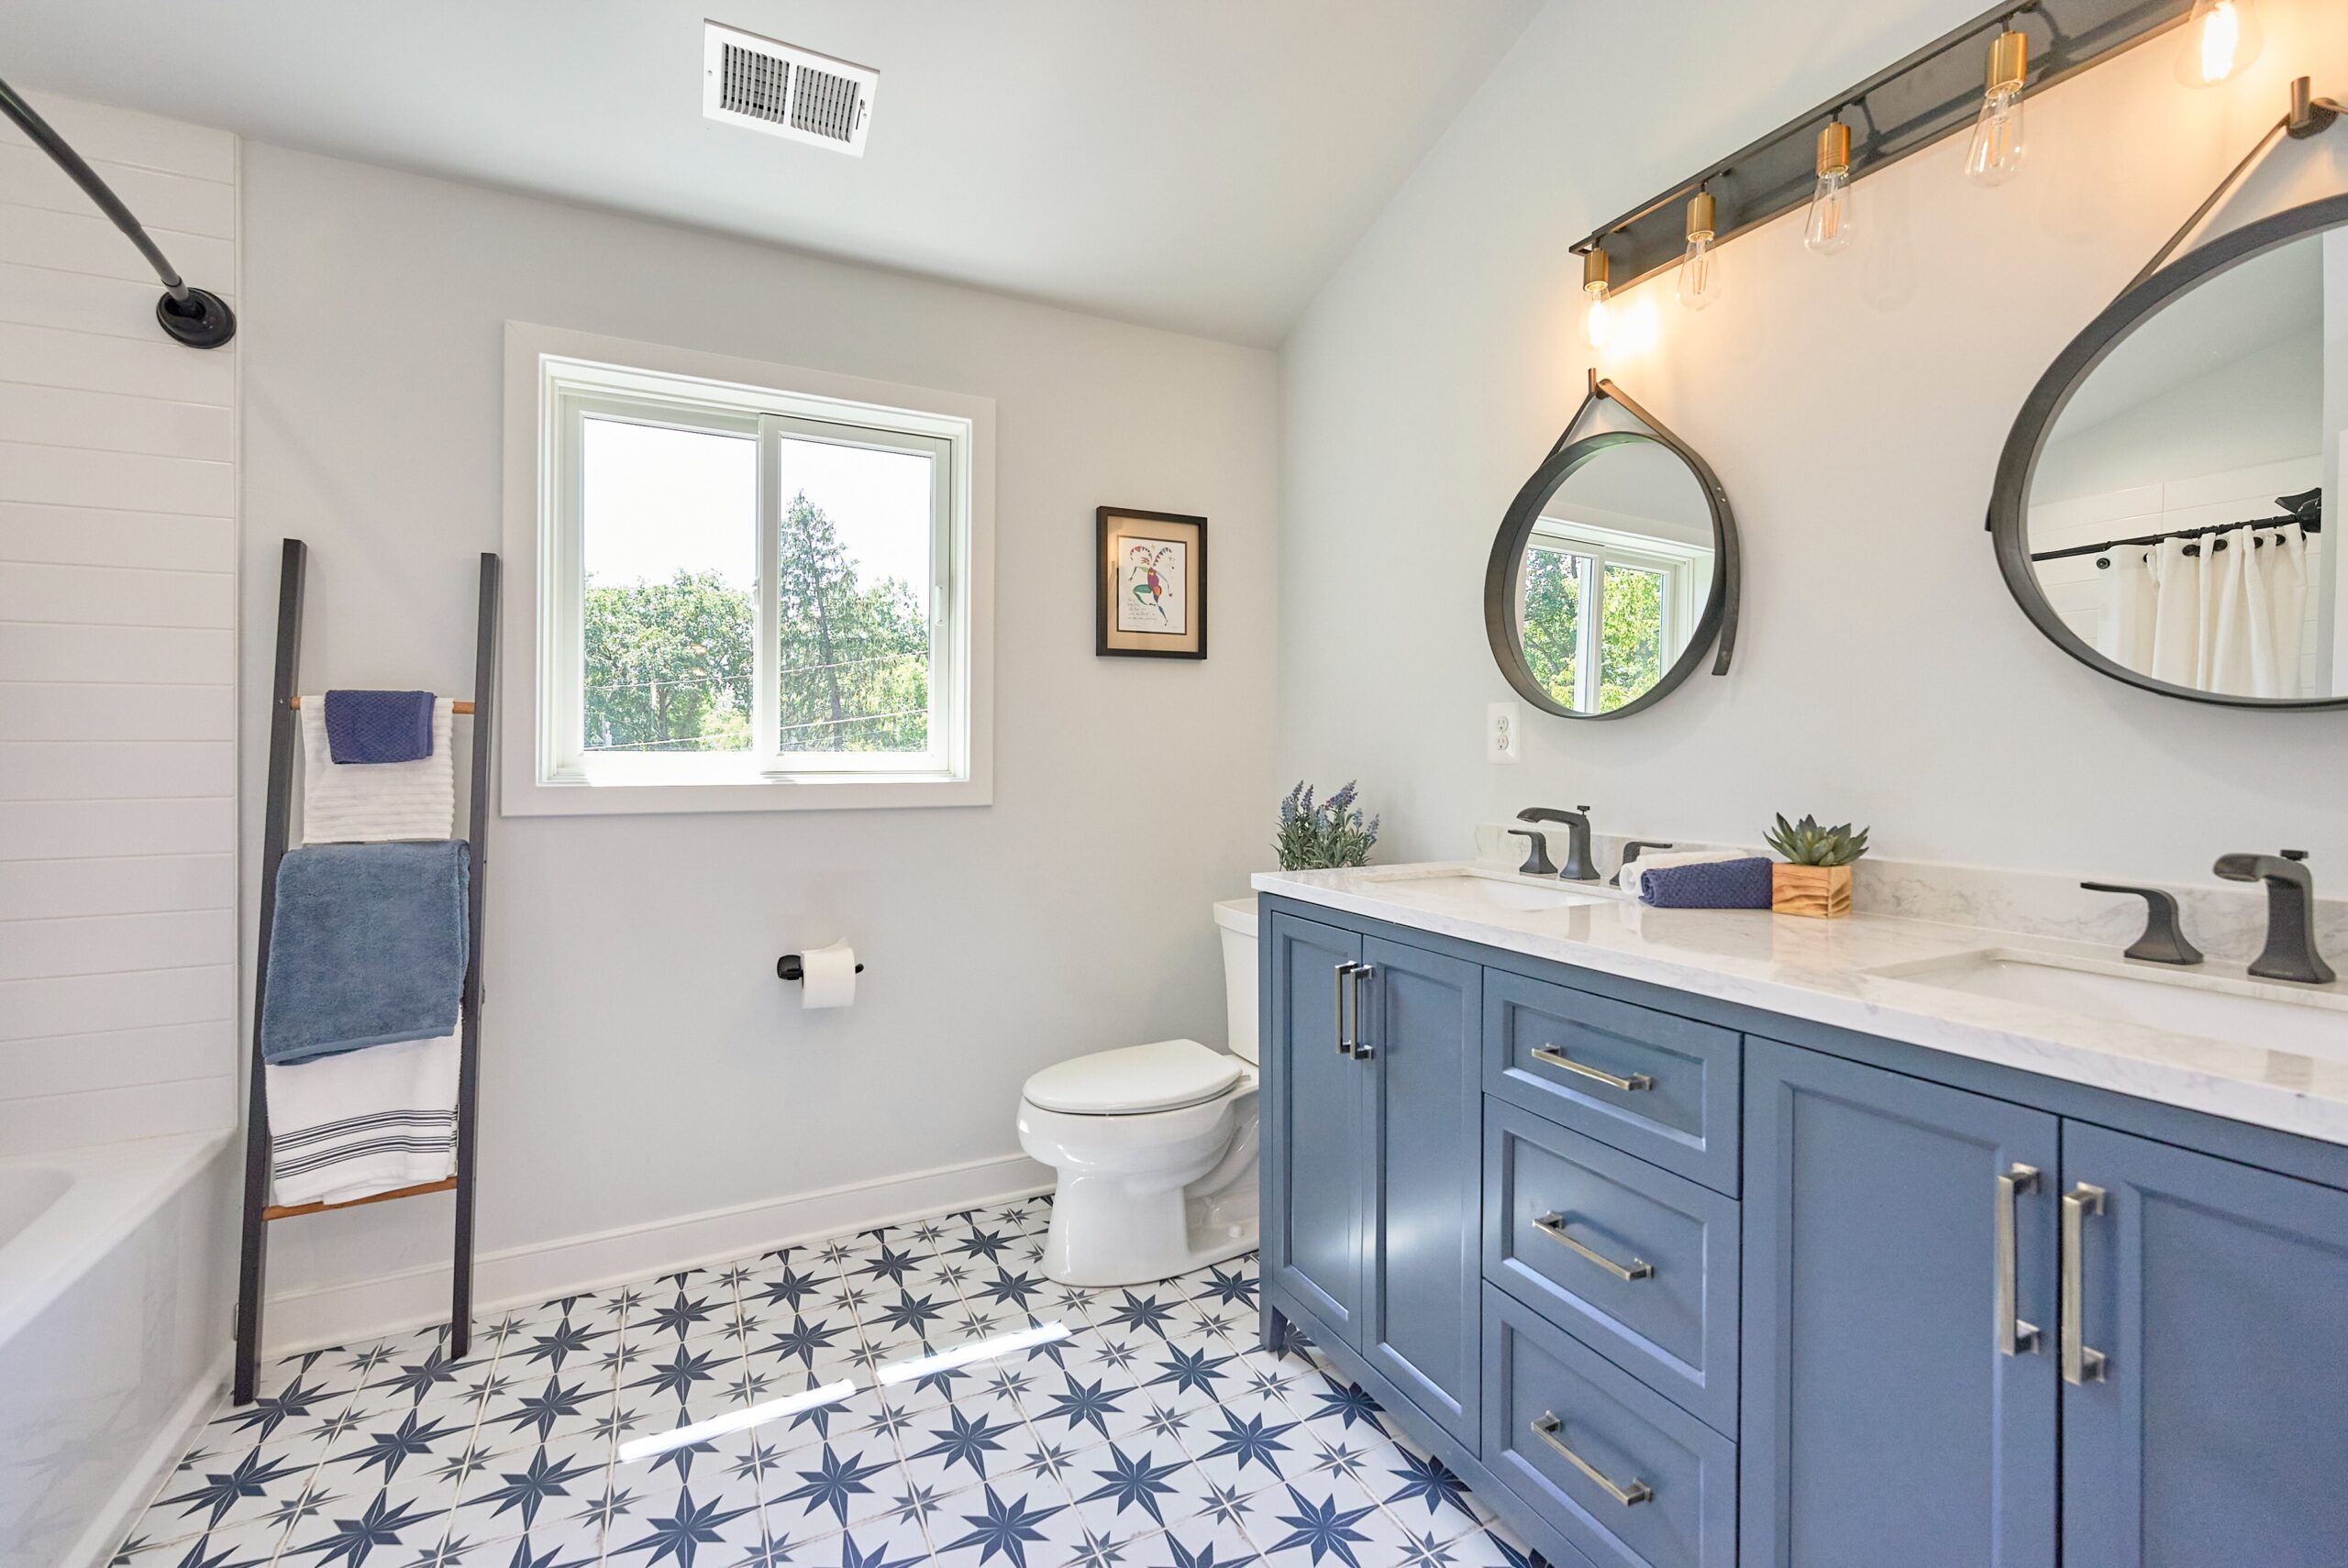 Professional photo of interior of custom home in Falls Church, Virginia. Shows remodeled bathroom with intricate tilework on the floor and dual vanities with white/grey/soft blue color scheme.